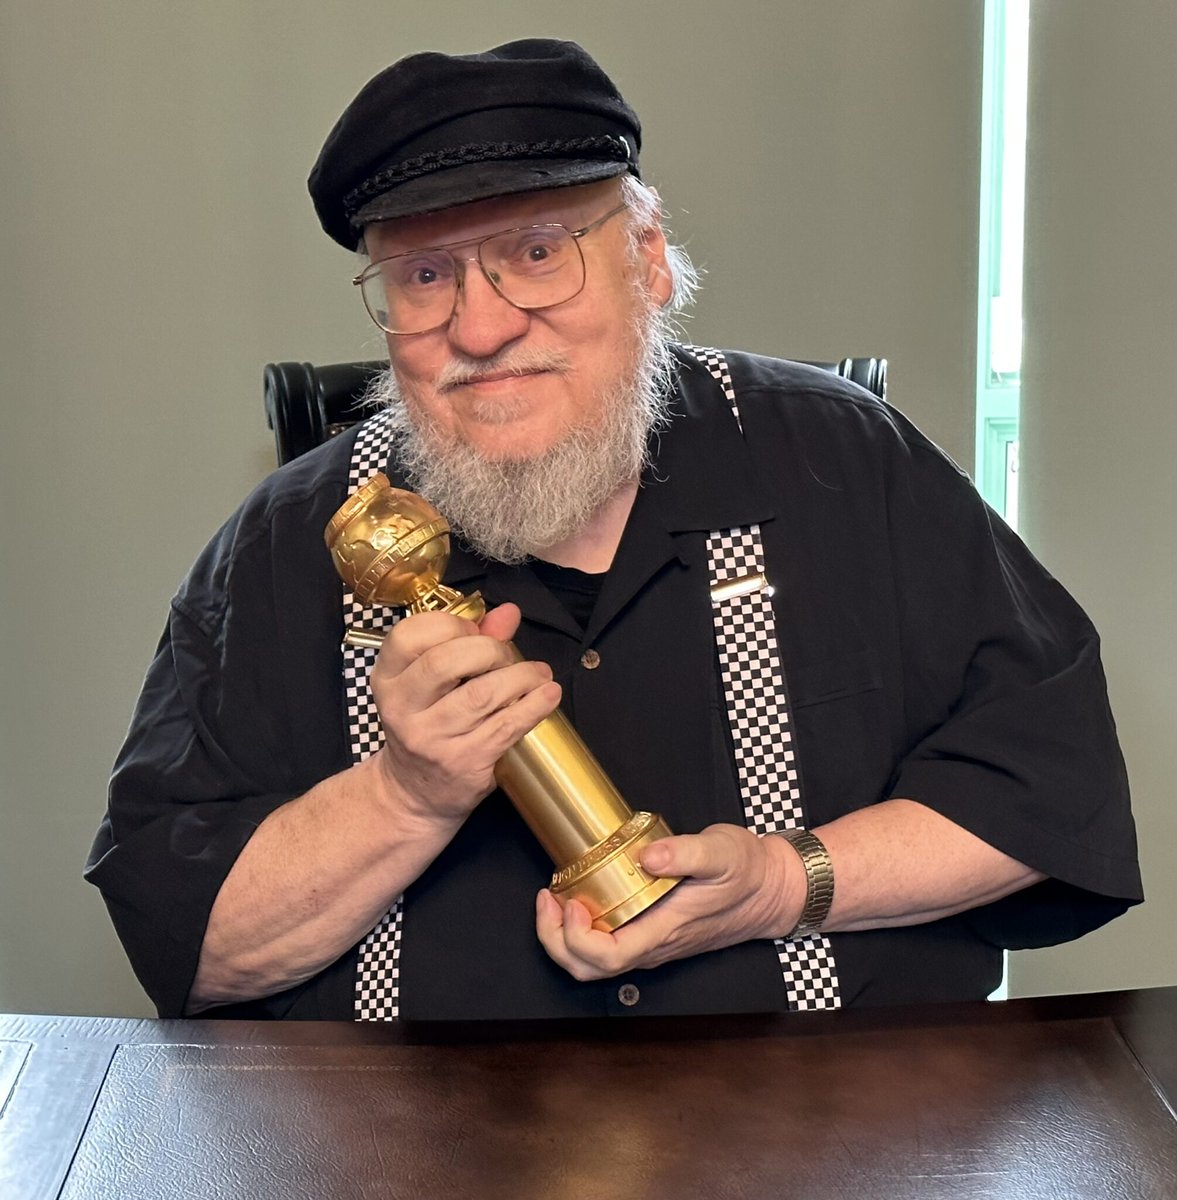 All of us at HBO and HOUSE OF THE DRAGON were thrilled when Hot D won this year's Golden Globe Award as Best Dramatic Series. georgerrmartin.com/notablog/2023/…